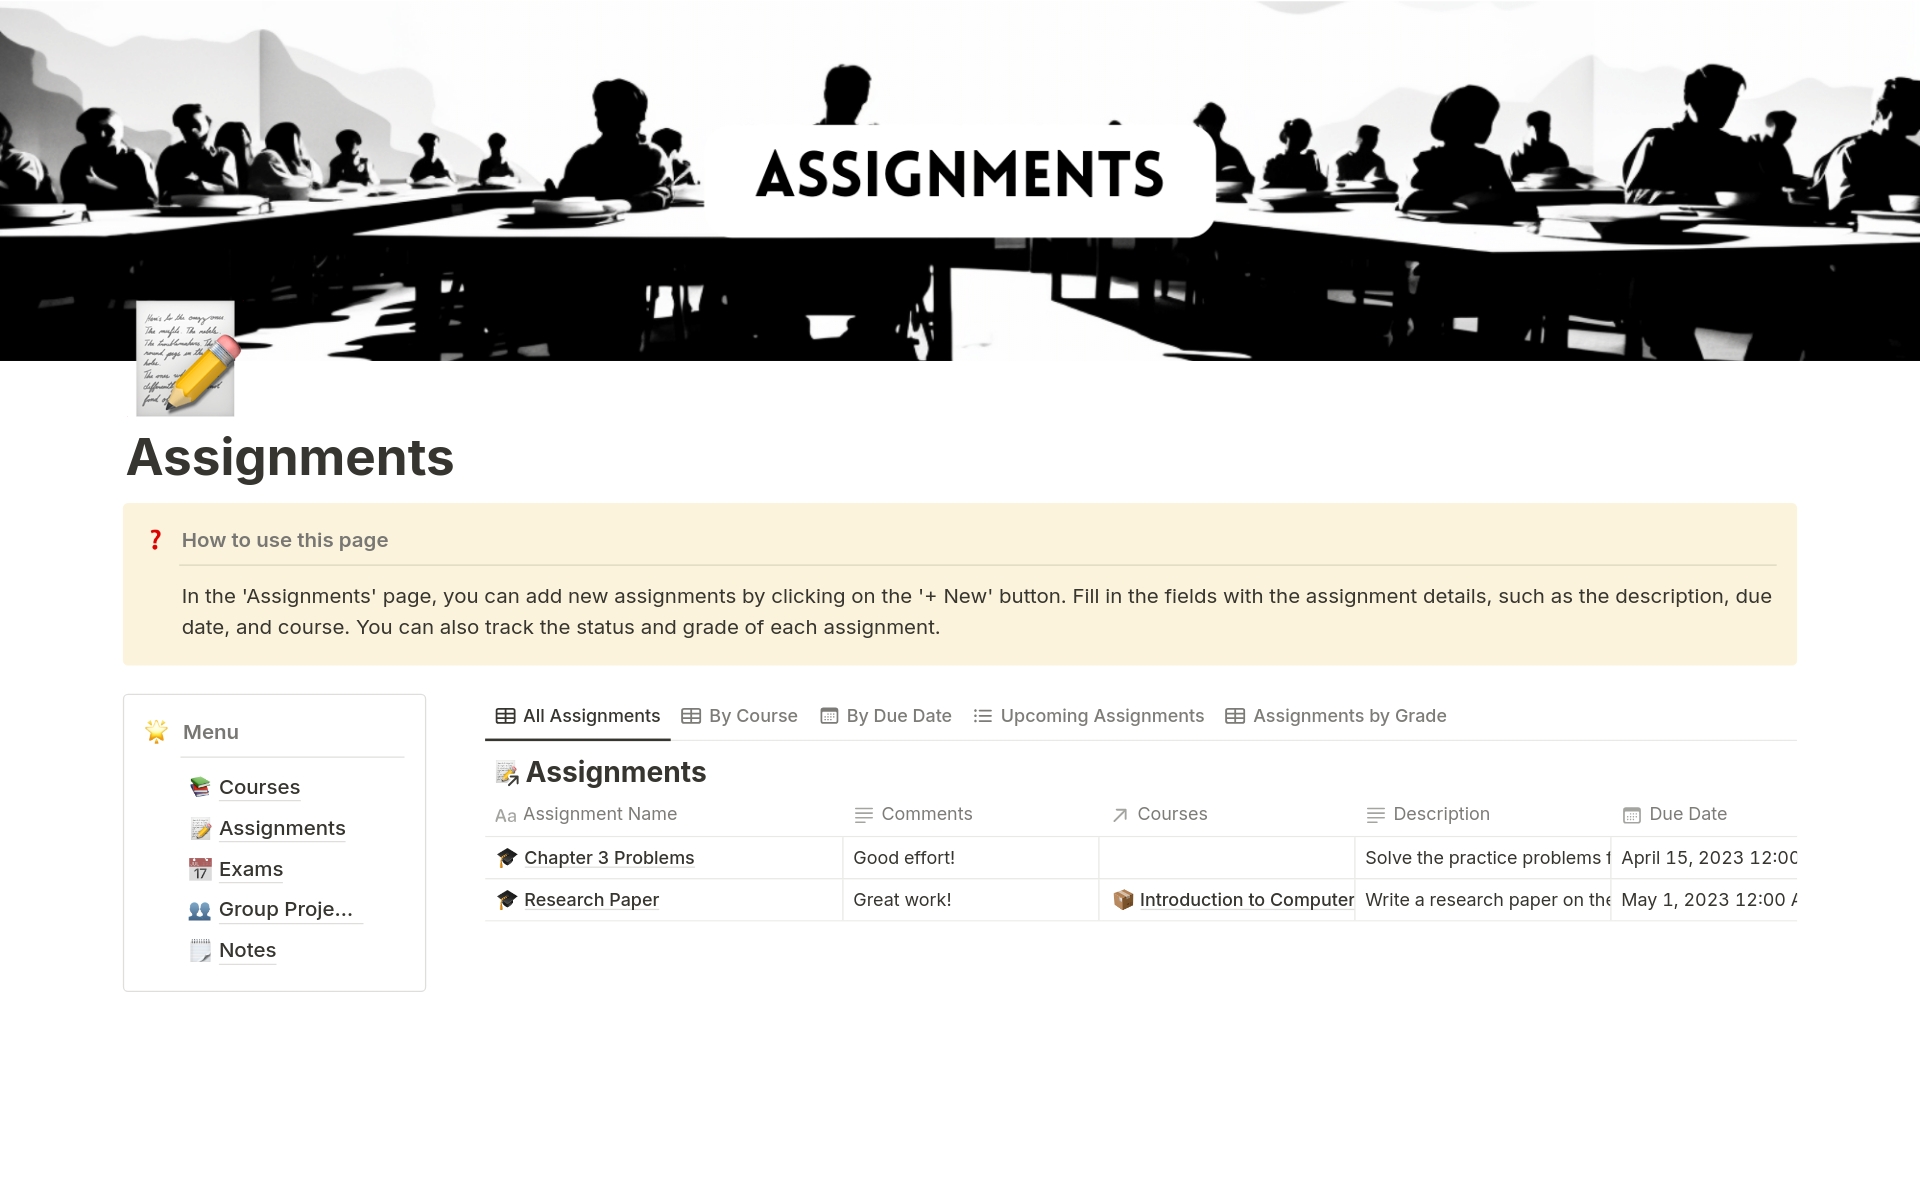 This comprehensive template is designed to help you stay organized, manage your courses, assignments, exams, group projects, and notes. With customizable fields and a user-friendly interface, you'll be able to track your academic progress and optimize your study routine.